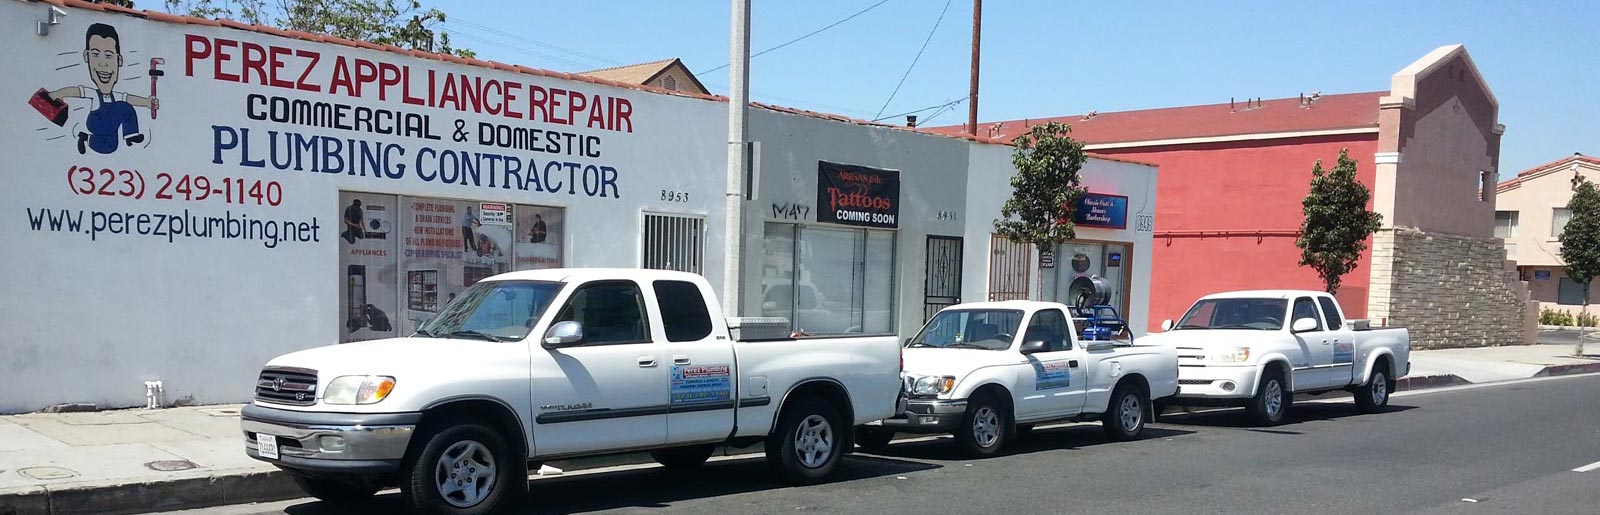 Plumbers Services in Pico Rivera 